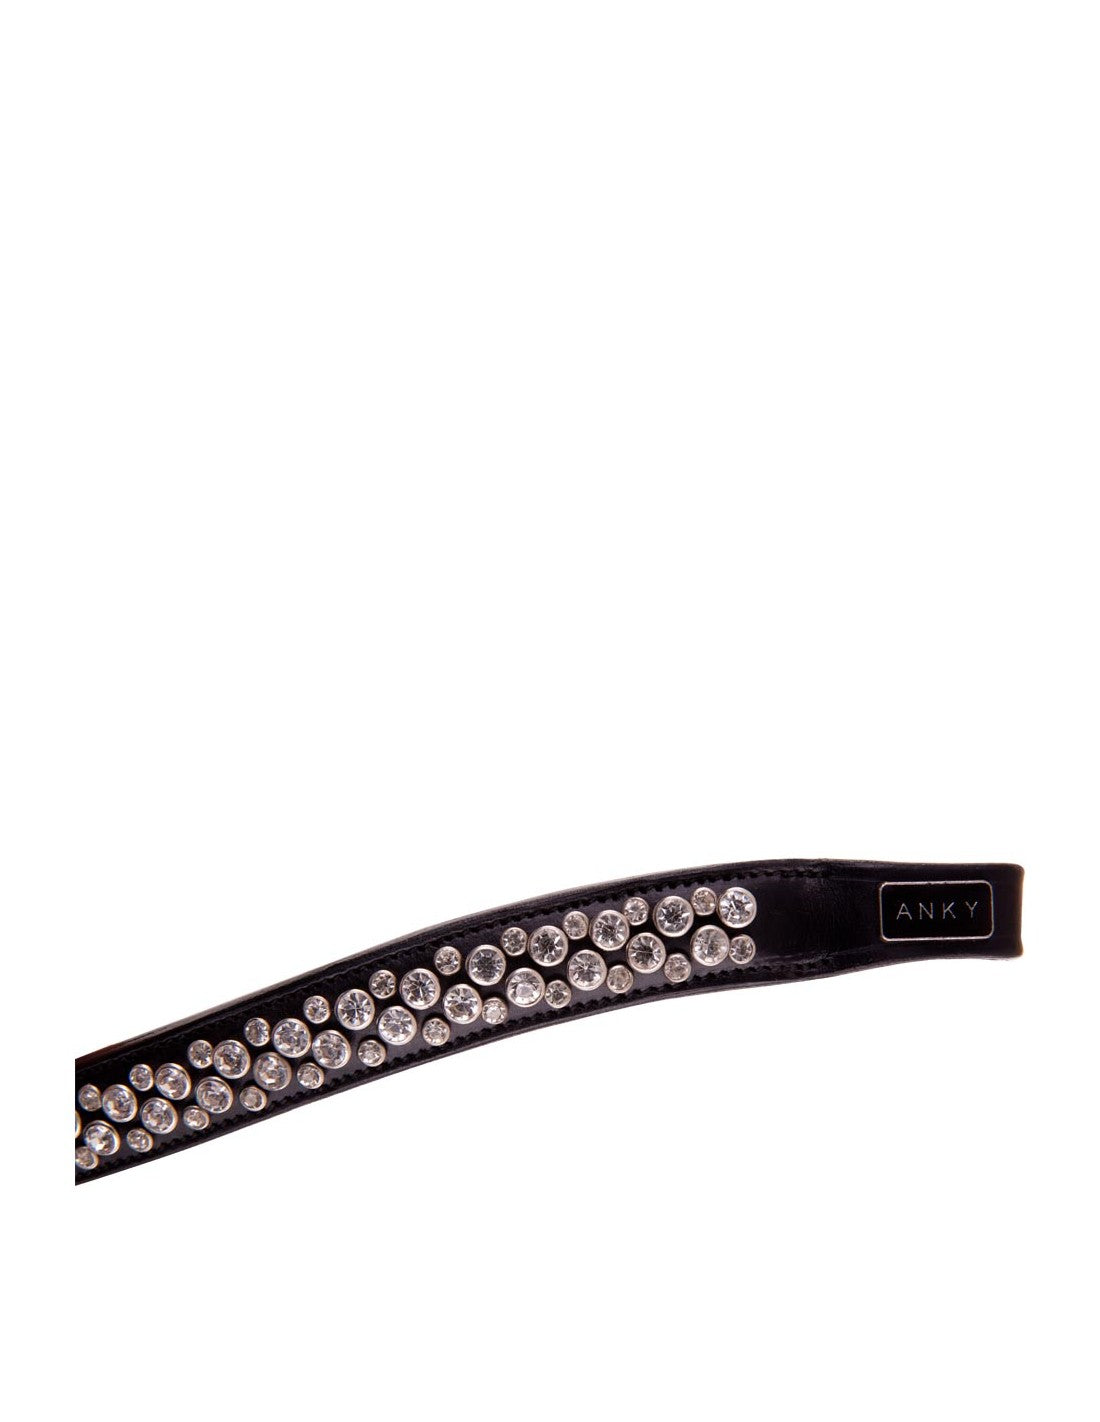 Anky Rivet Browband ATH16007 Black/Full - *Clearance!*